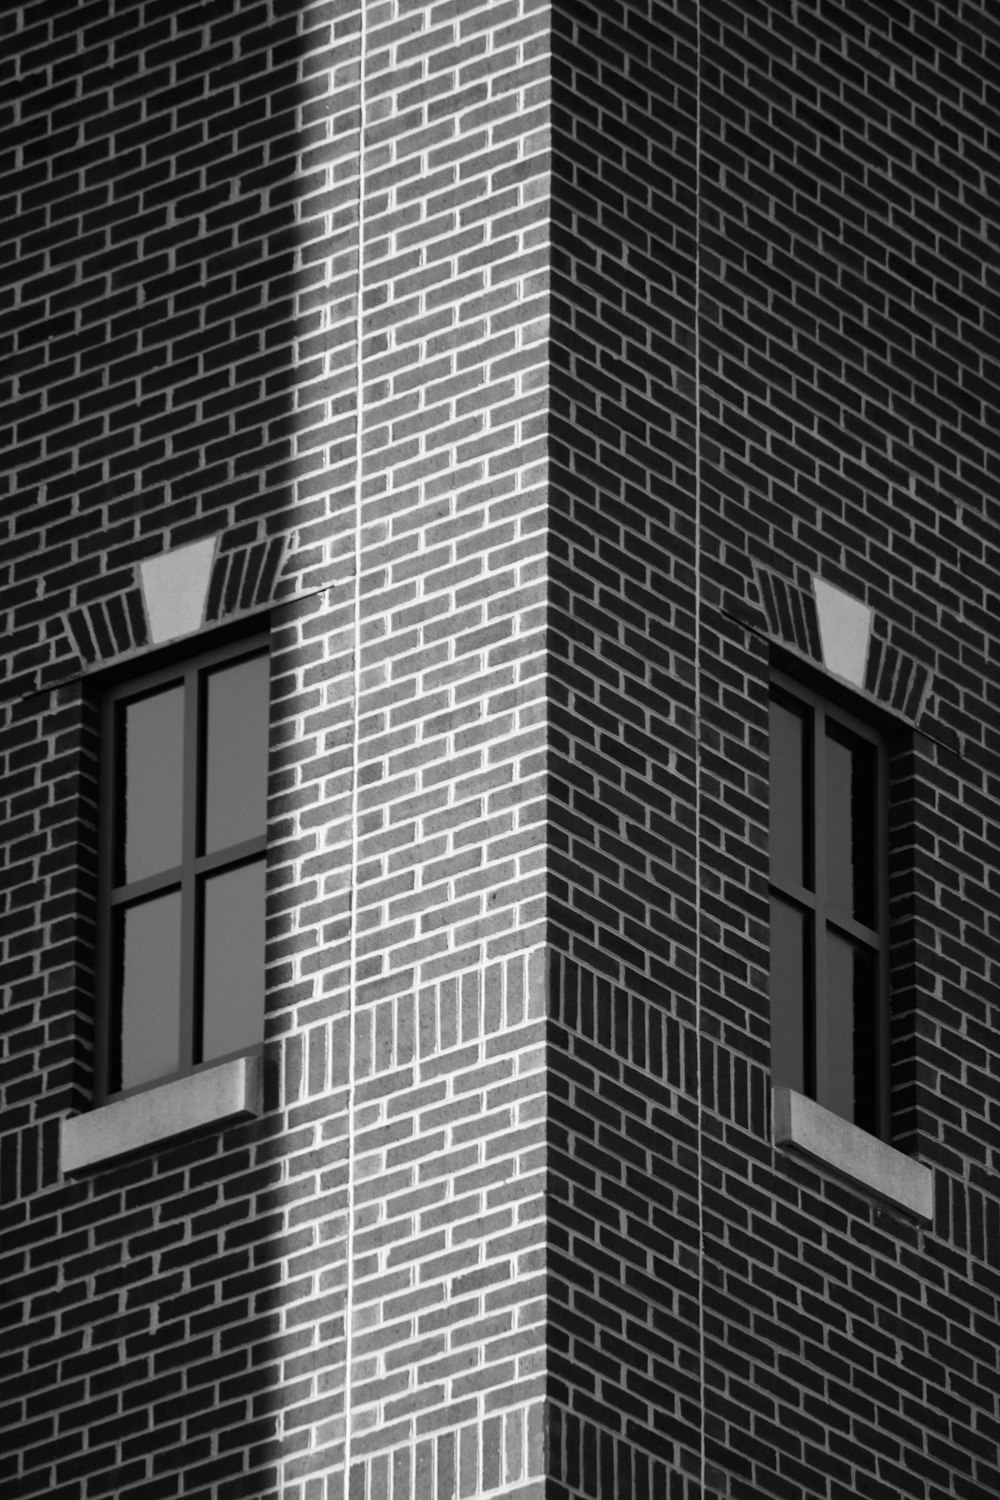 a black and white photo of two windows on a brick building